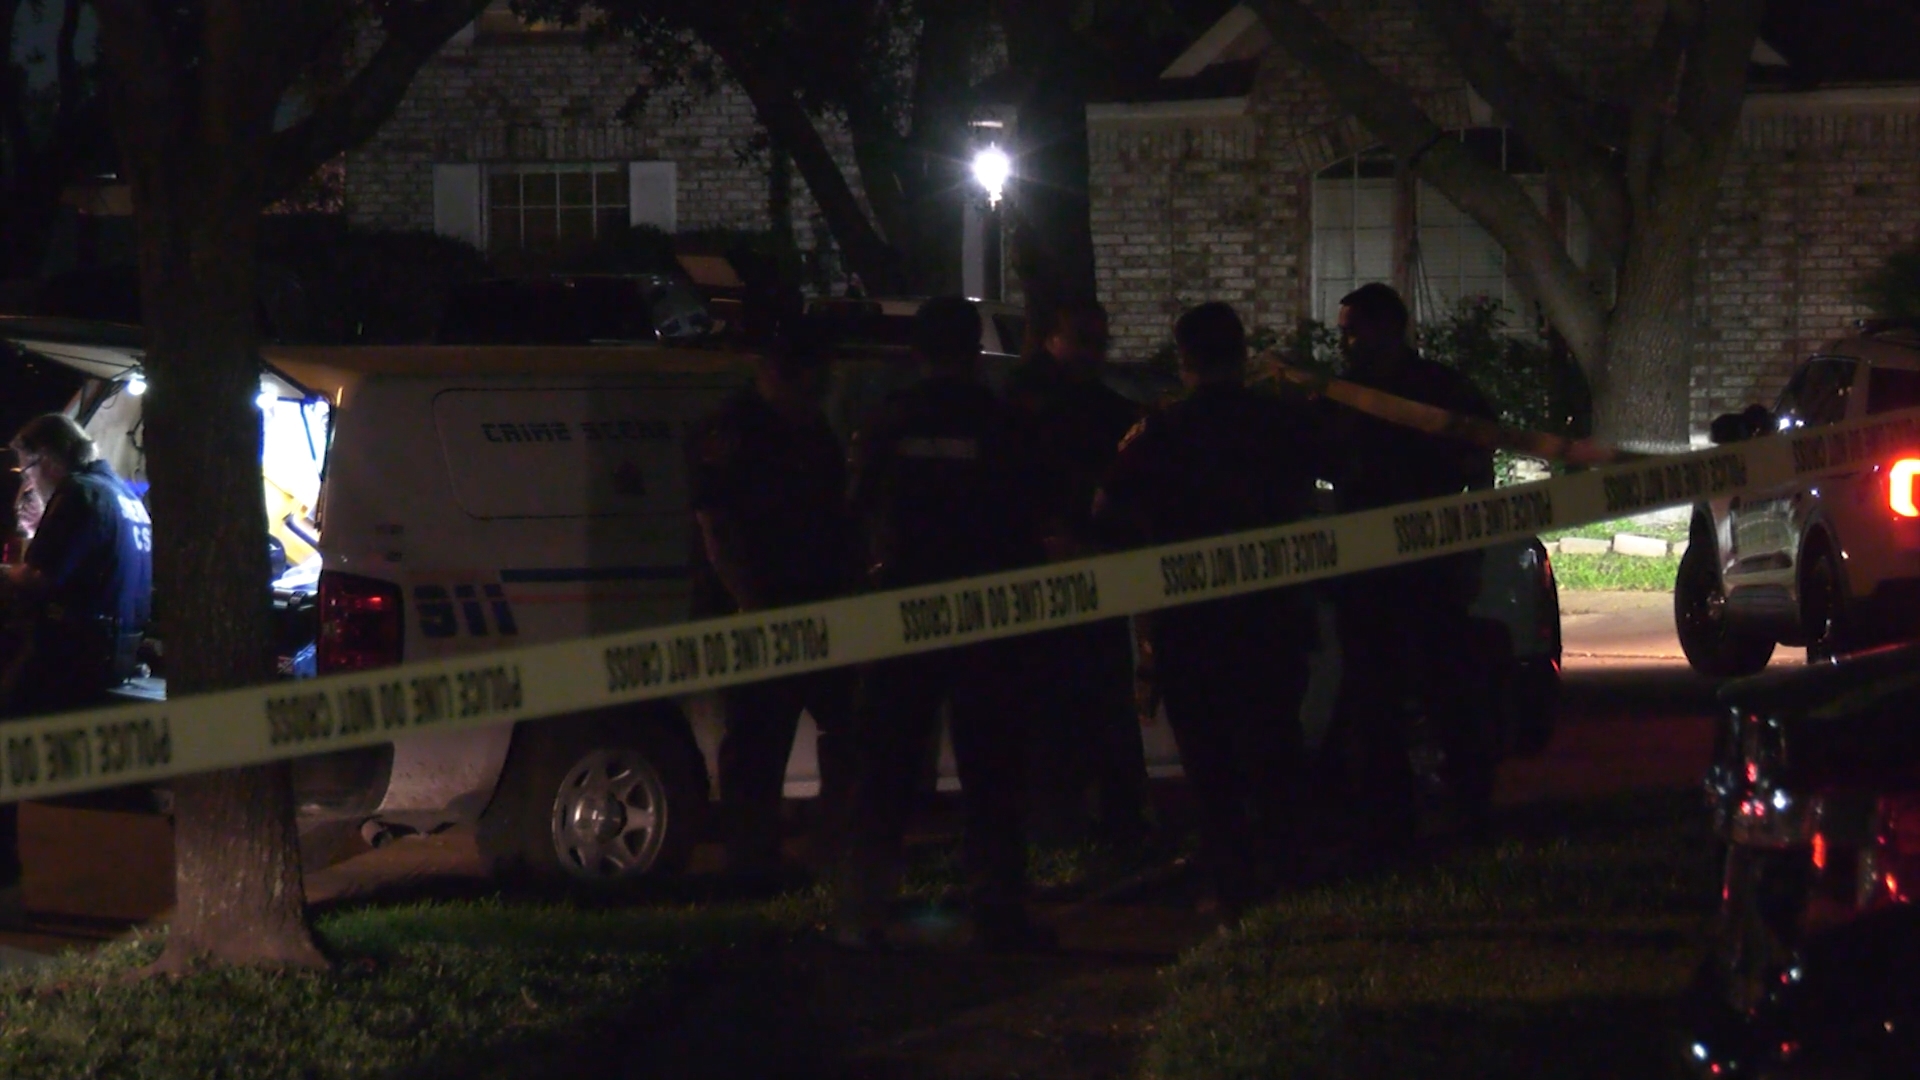 A man and a woman were found dead in an apparent murder-suicide in northwest Harris County Tuesday night, according to Sheriff Ed Gonzalez.